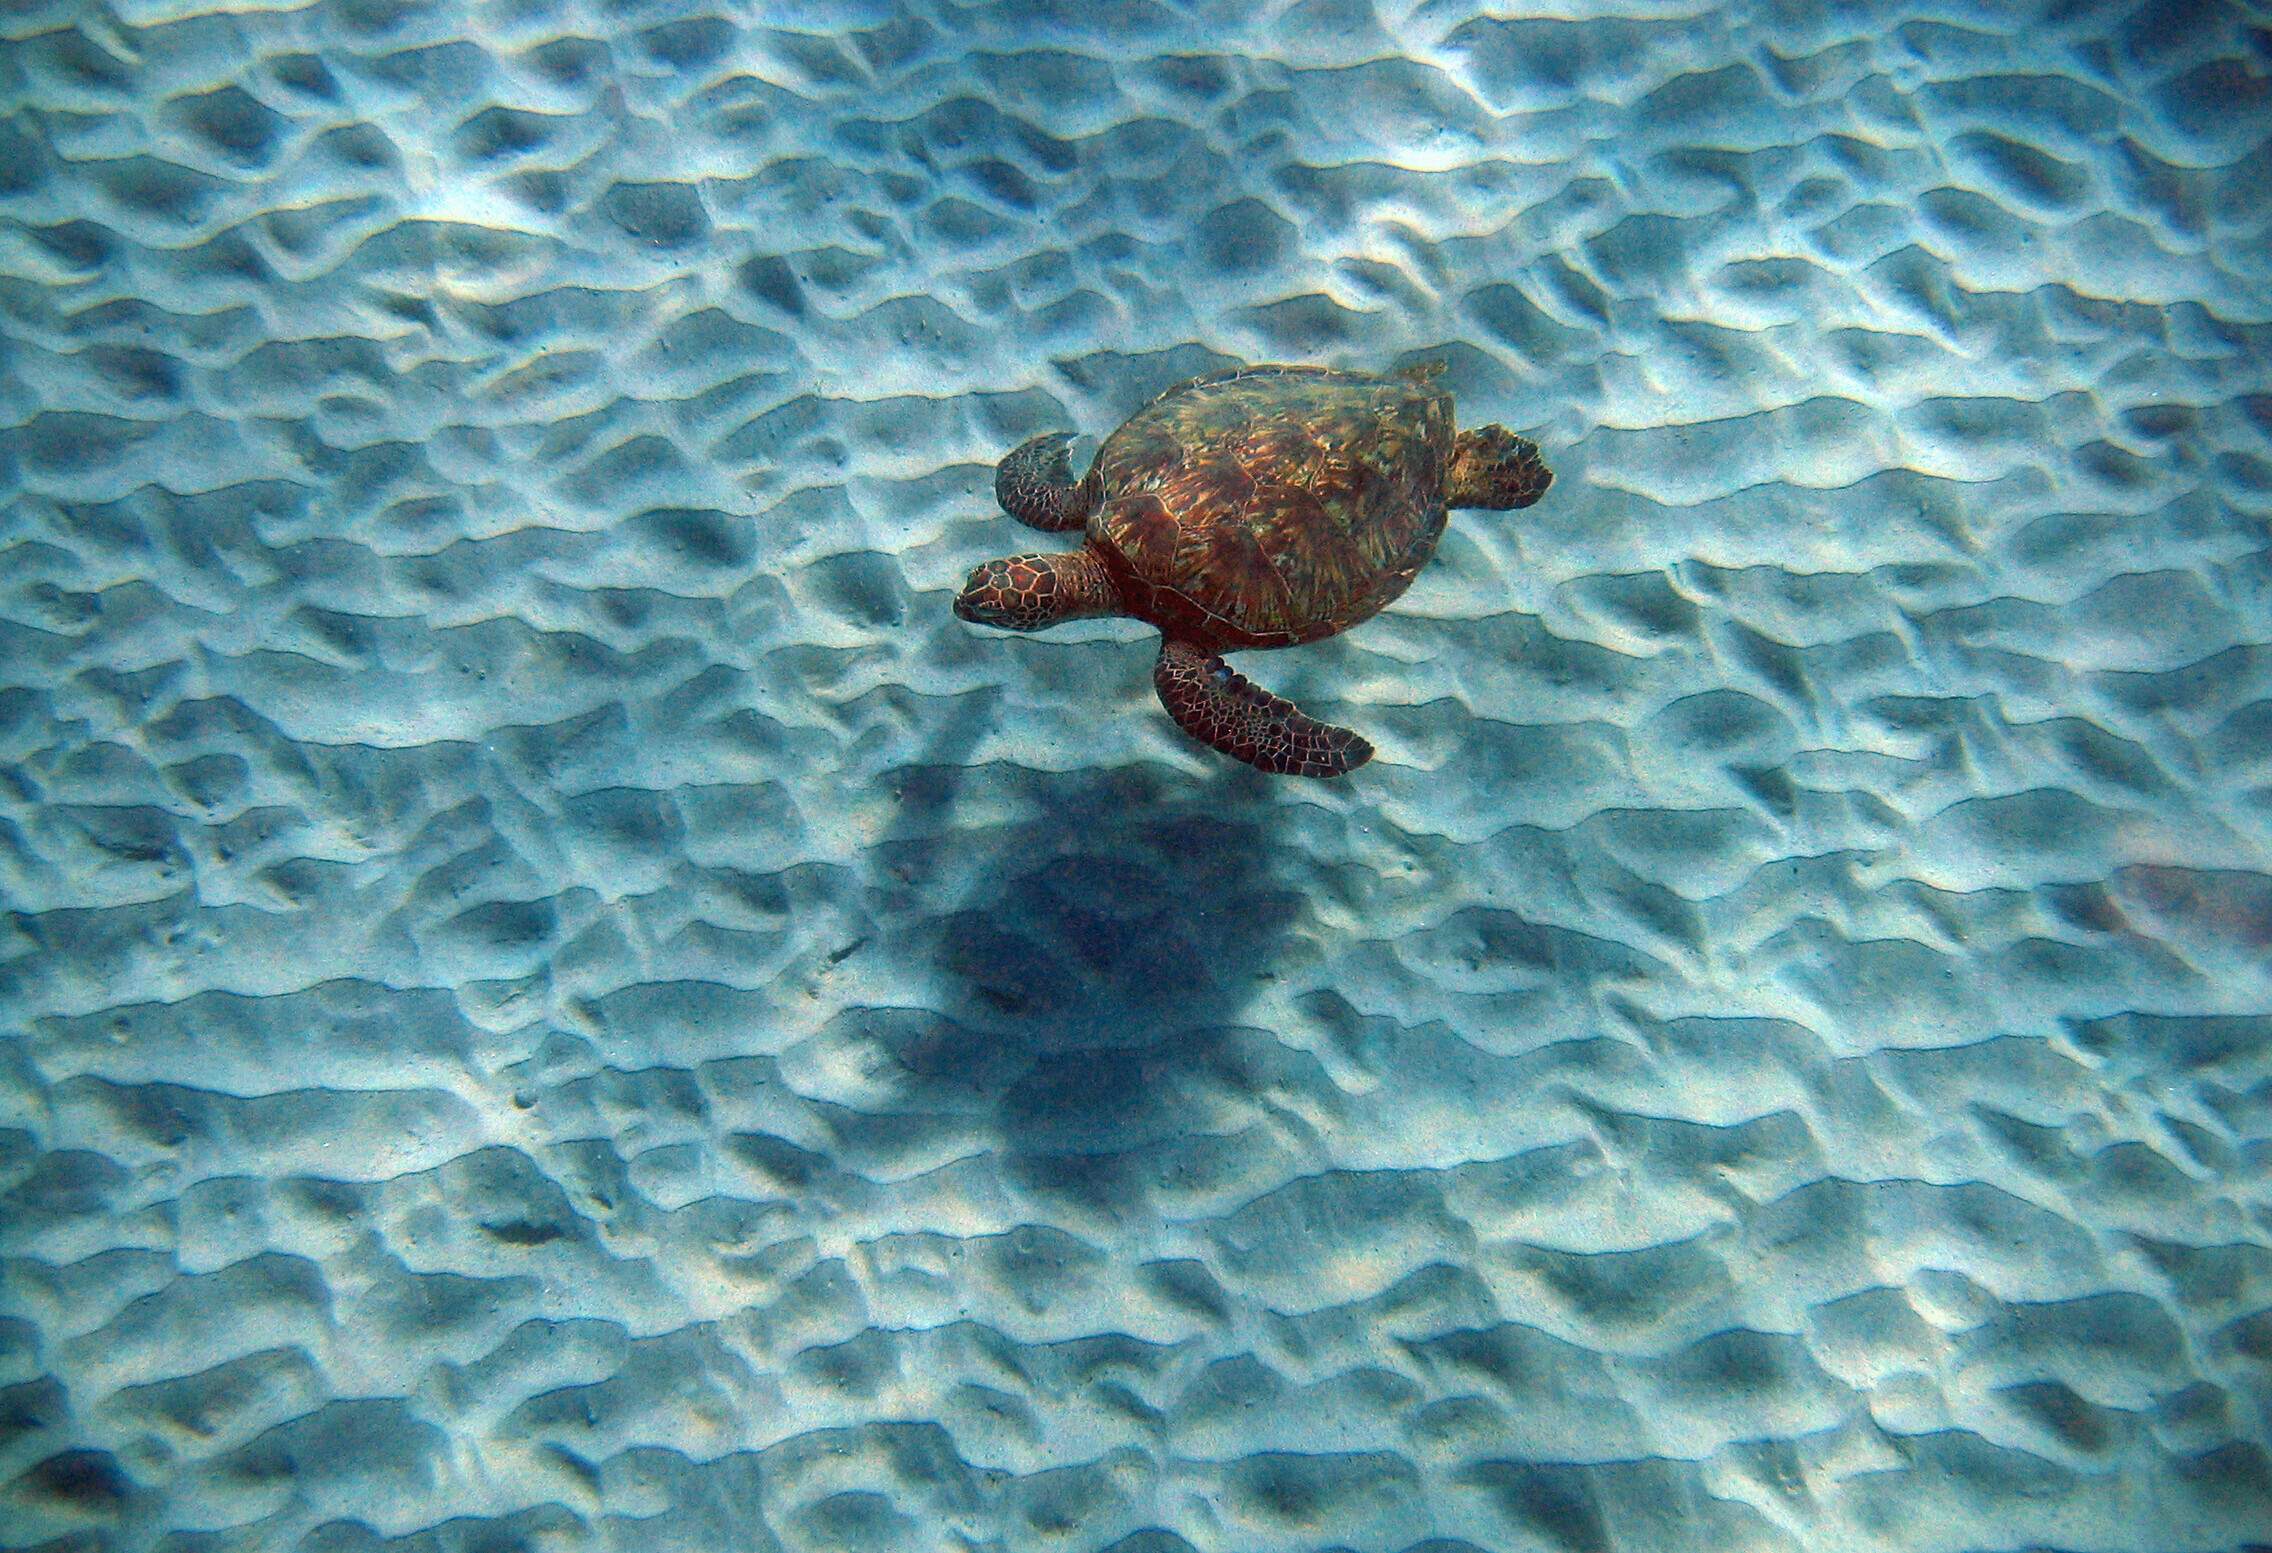 A sea turtle swimming in clear blue water in the Bahamas, Caribbean